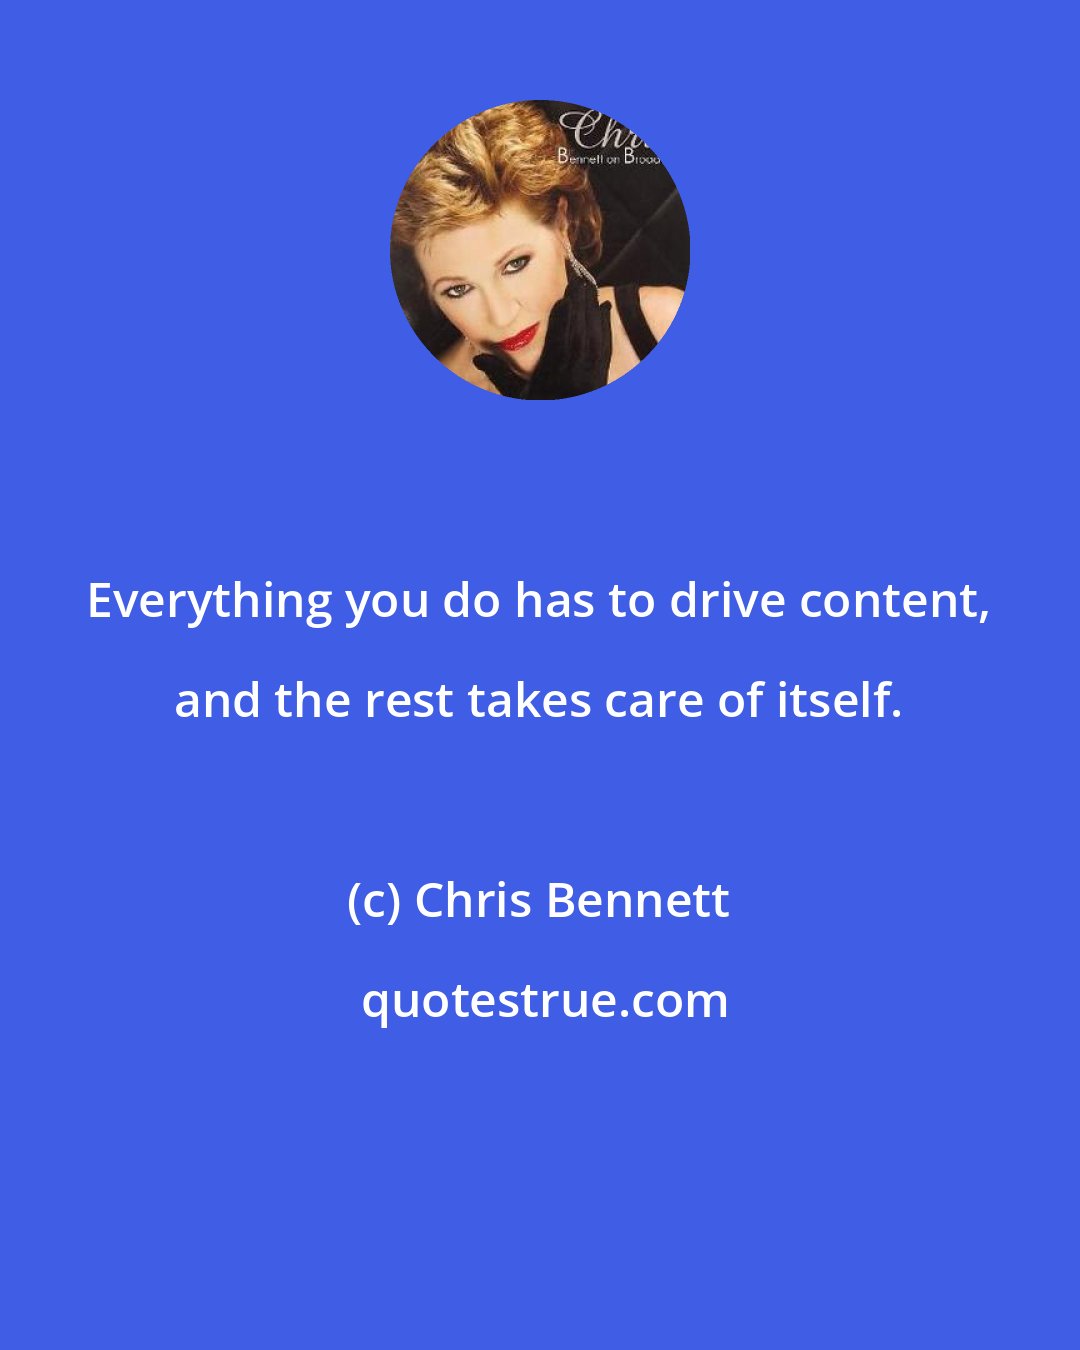 Chris Bennett: Everything you do has to drive content, and the rest takes care of itself.